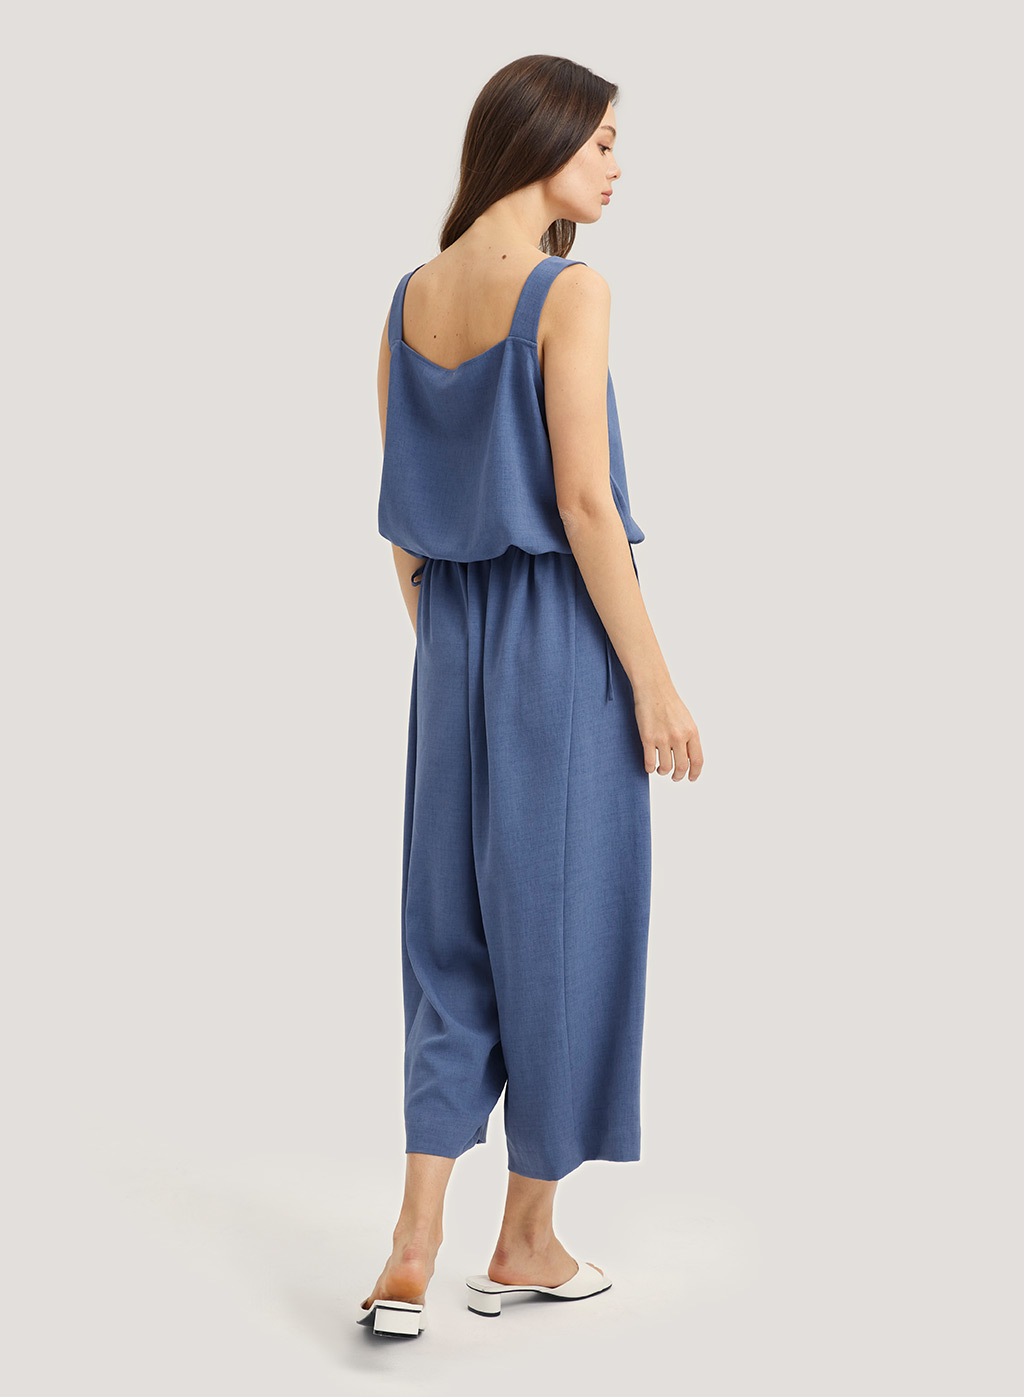 Uniqlo Blue Jumpsuits & Rompers